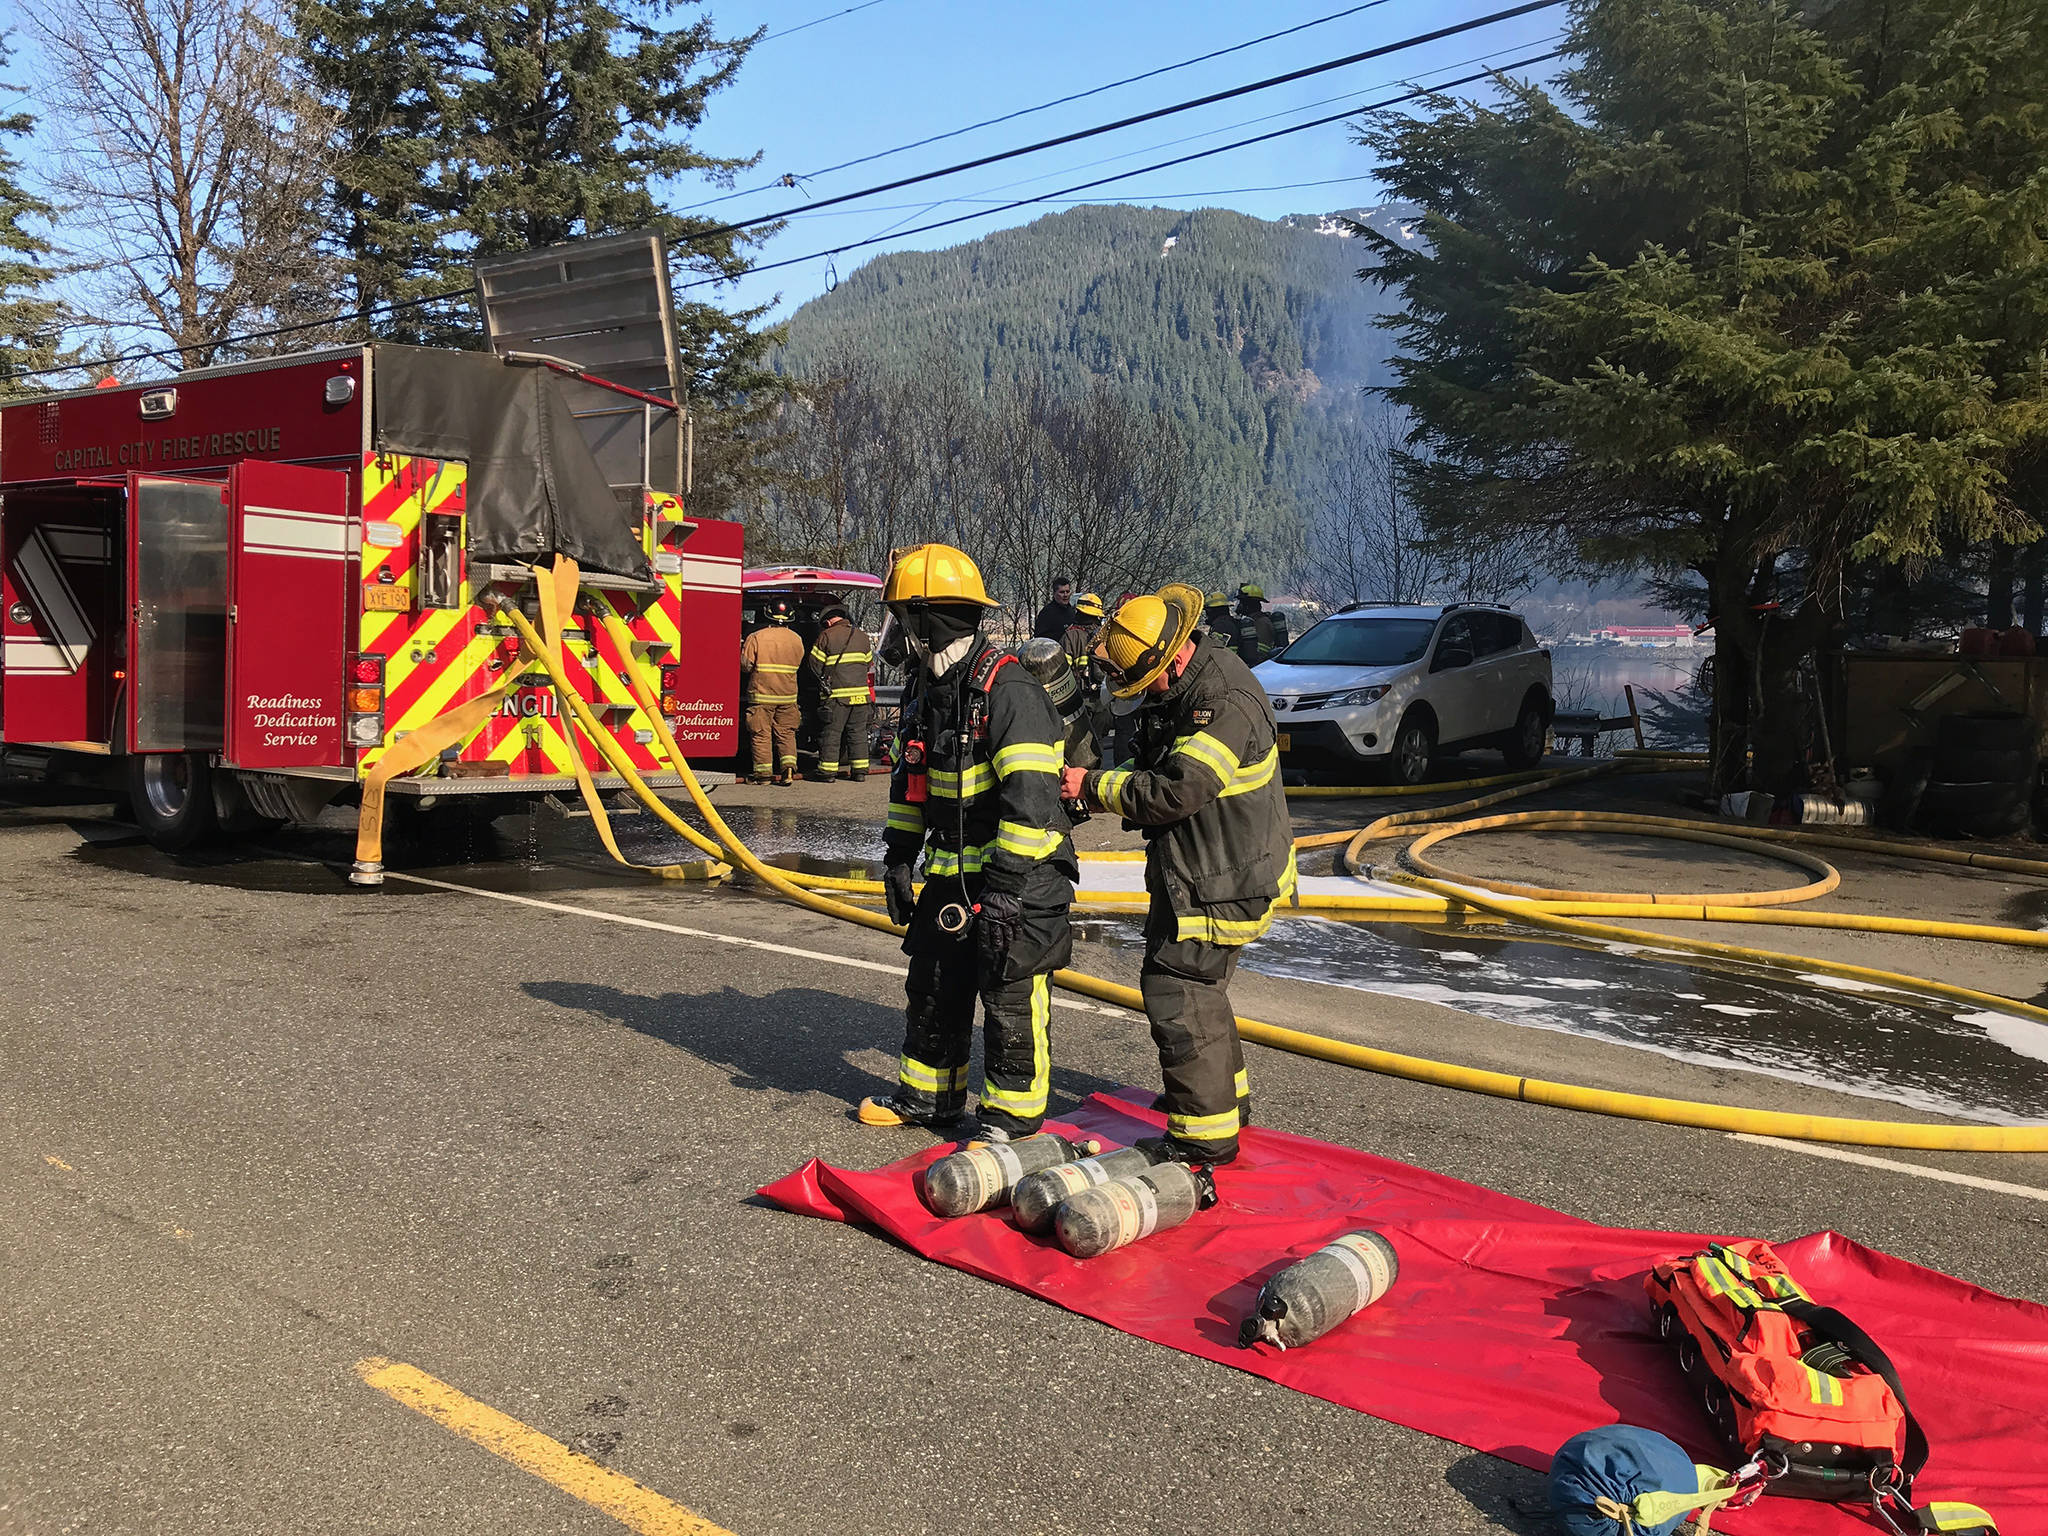 Firefighters are seen at the scene of a house fire on North Douglas Highway on Thursday, March 28, 2019. (Michael Penn | Juneau Empire)